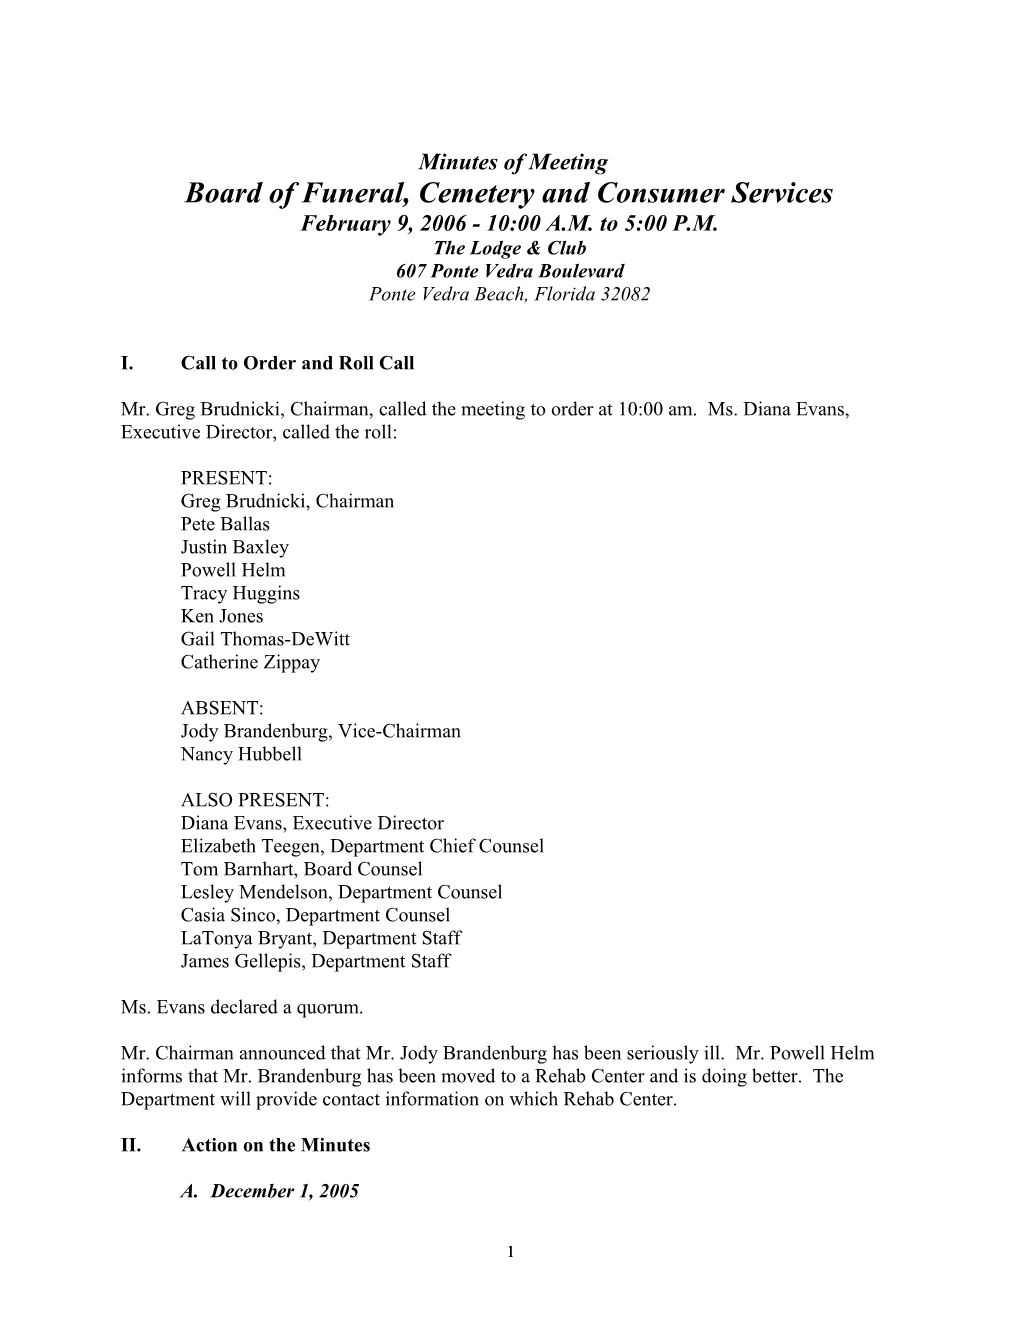 Board of Funeral, Cemetery and Consumer Services s1